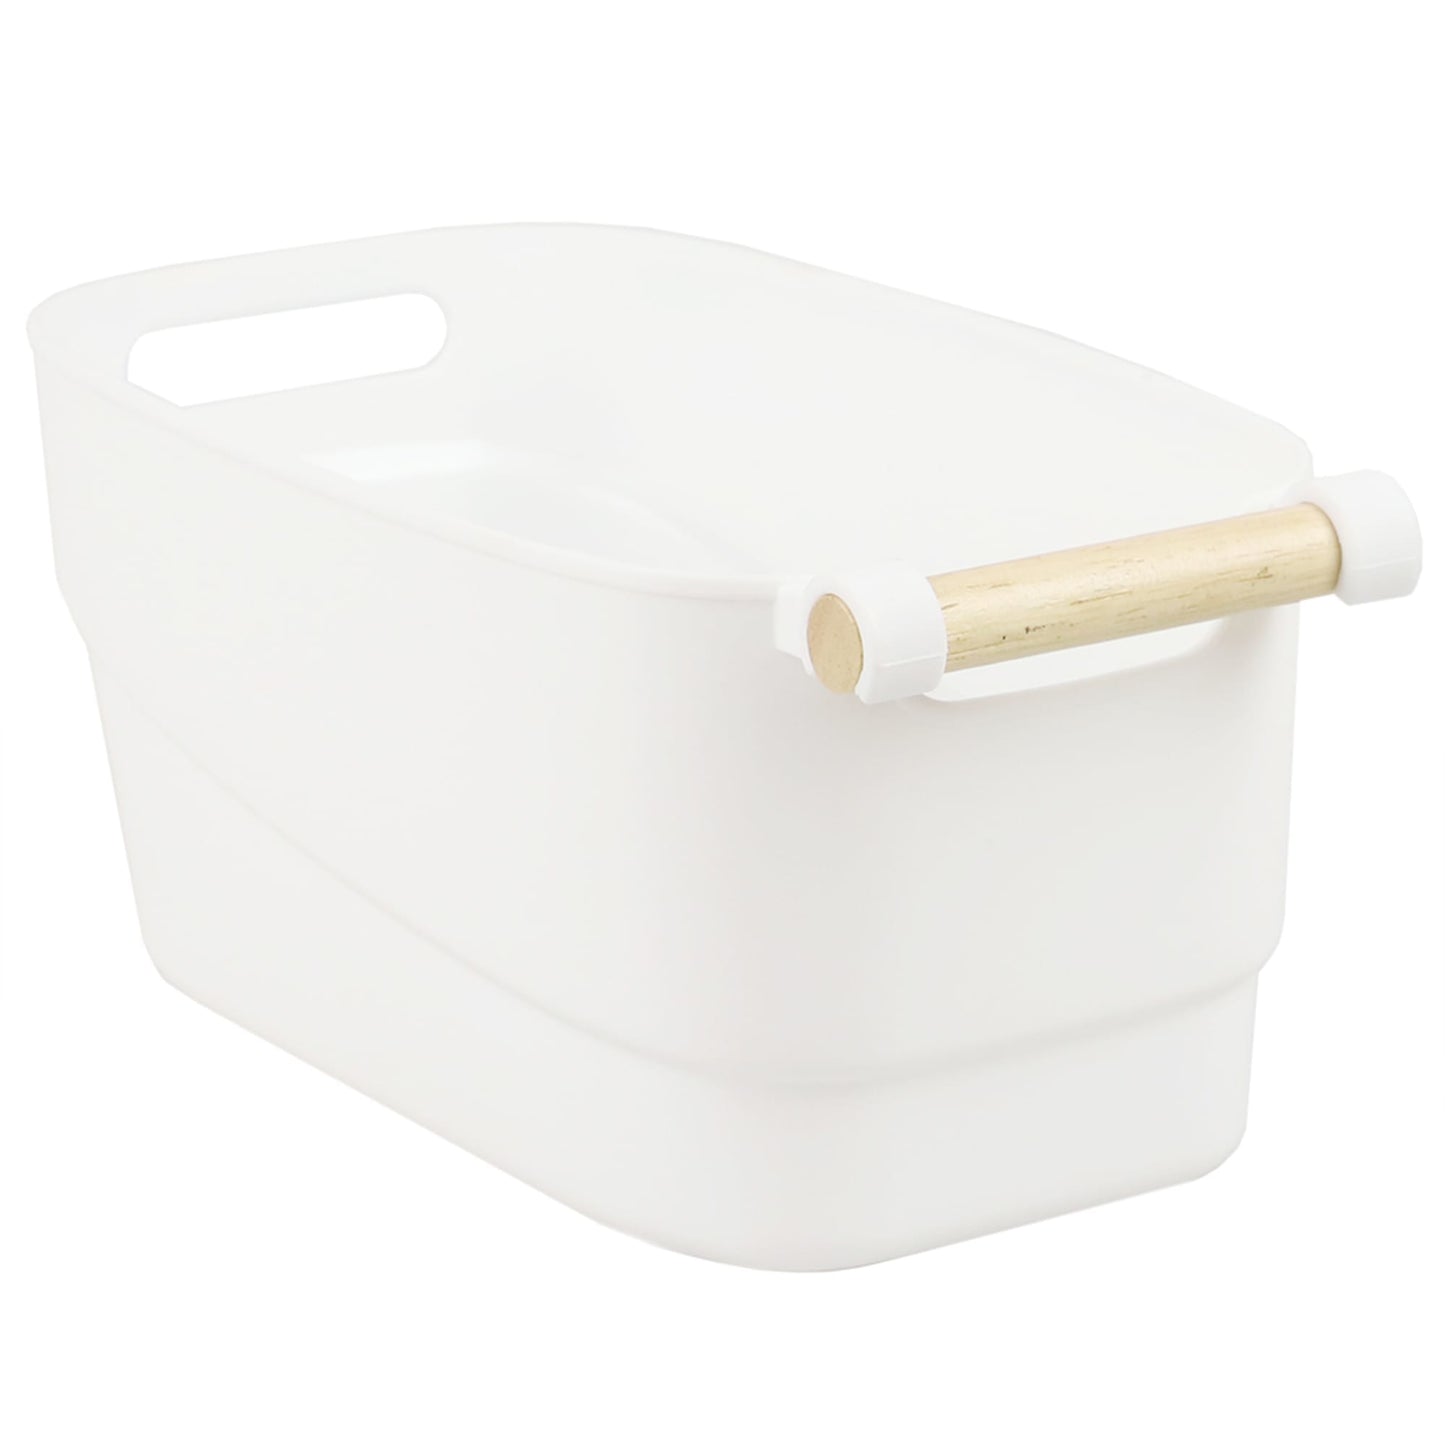 Small Plastic Basket with Wooden Handle, White